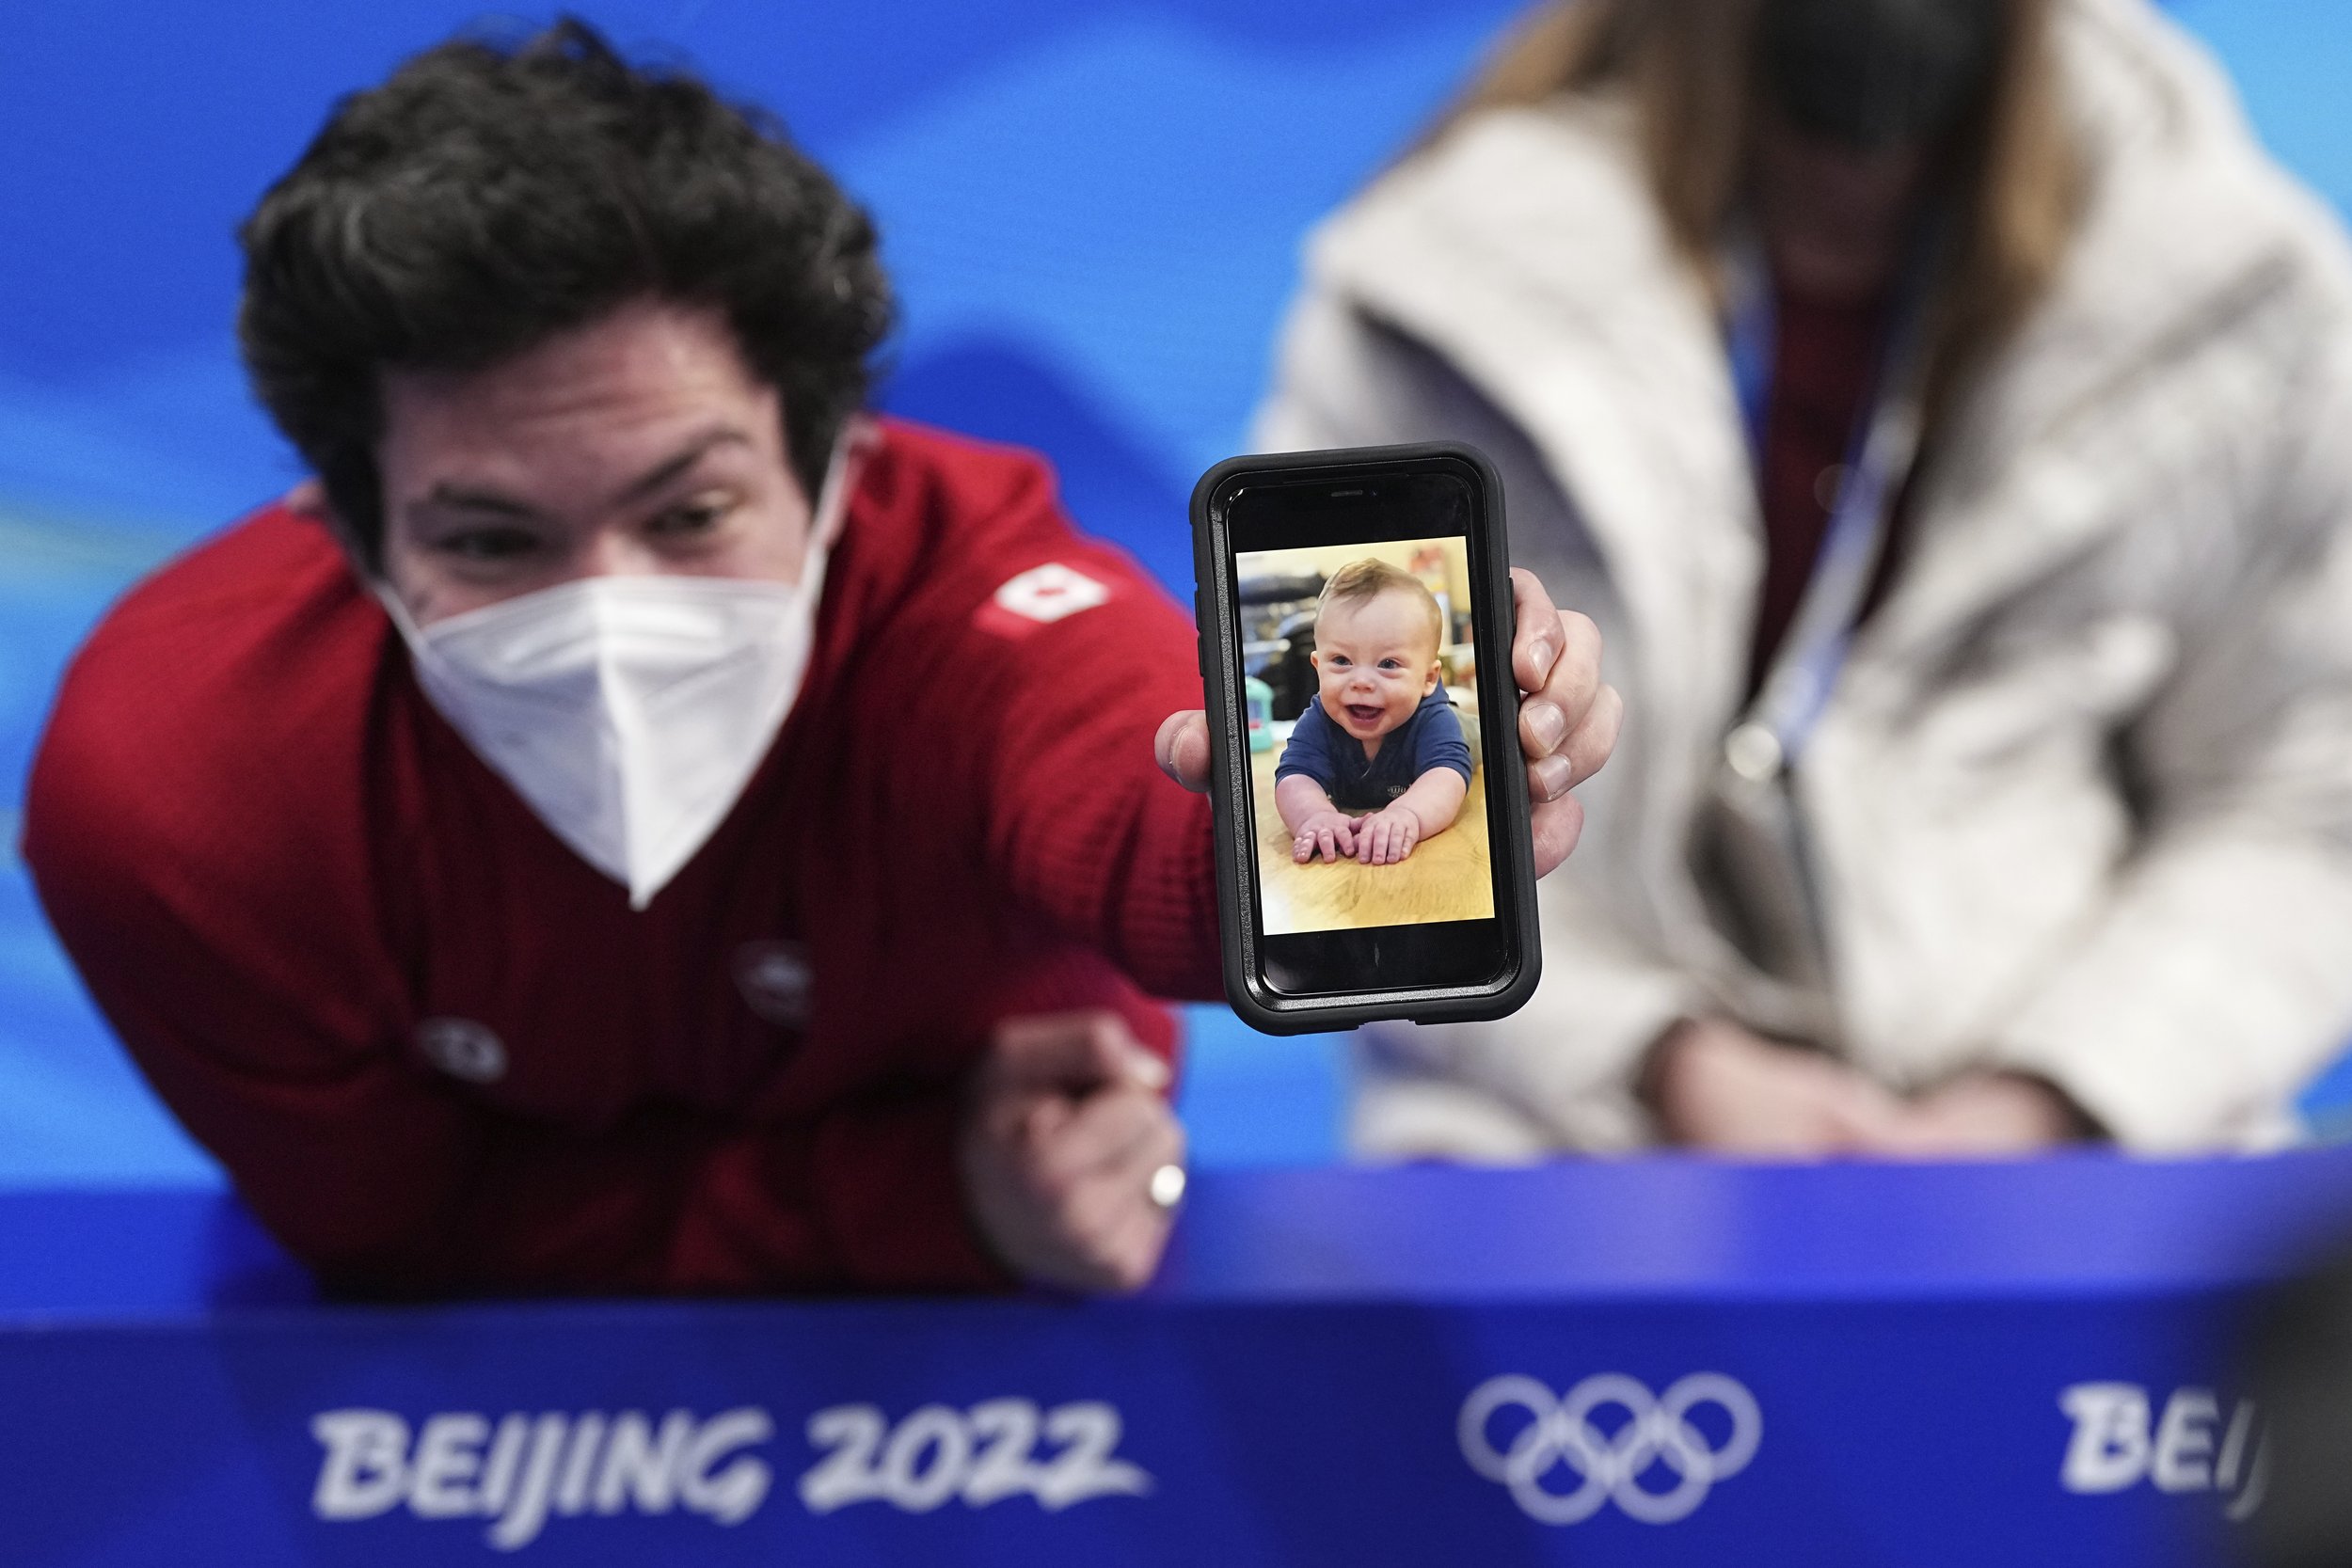  Keegan Messing, of Canada, reacts after the men's short program figure skating competition at the 2022 Winter Olympics, Tuesday, Feb. 8, 2022, in Beijing. (AP Photo/David J. Phillip) 